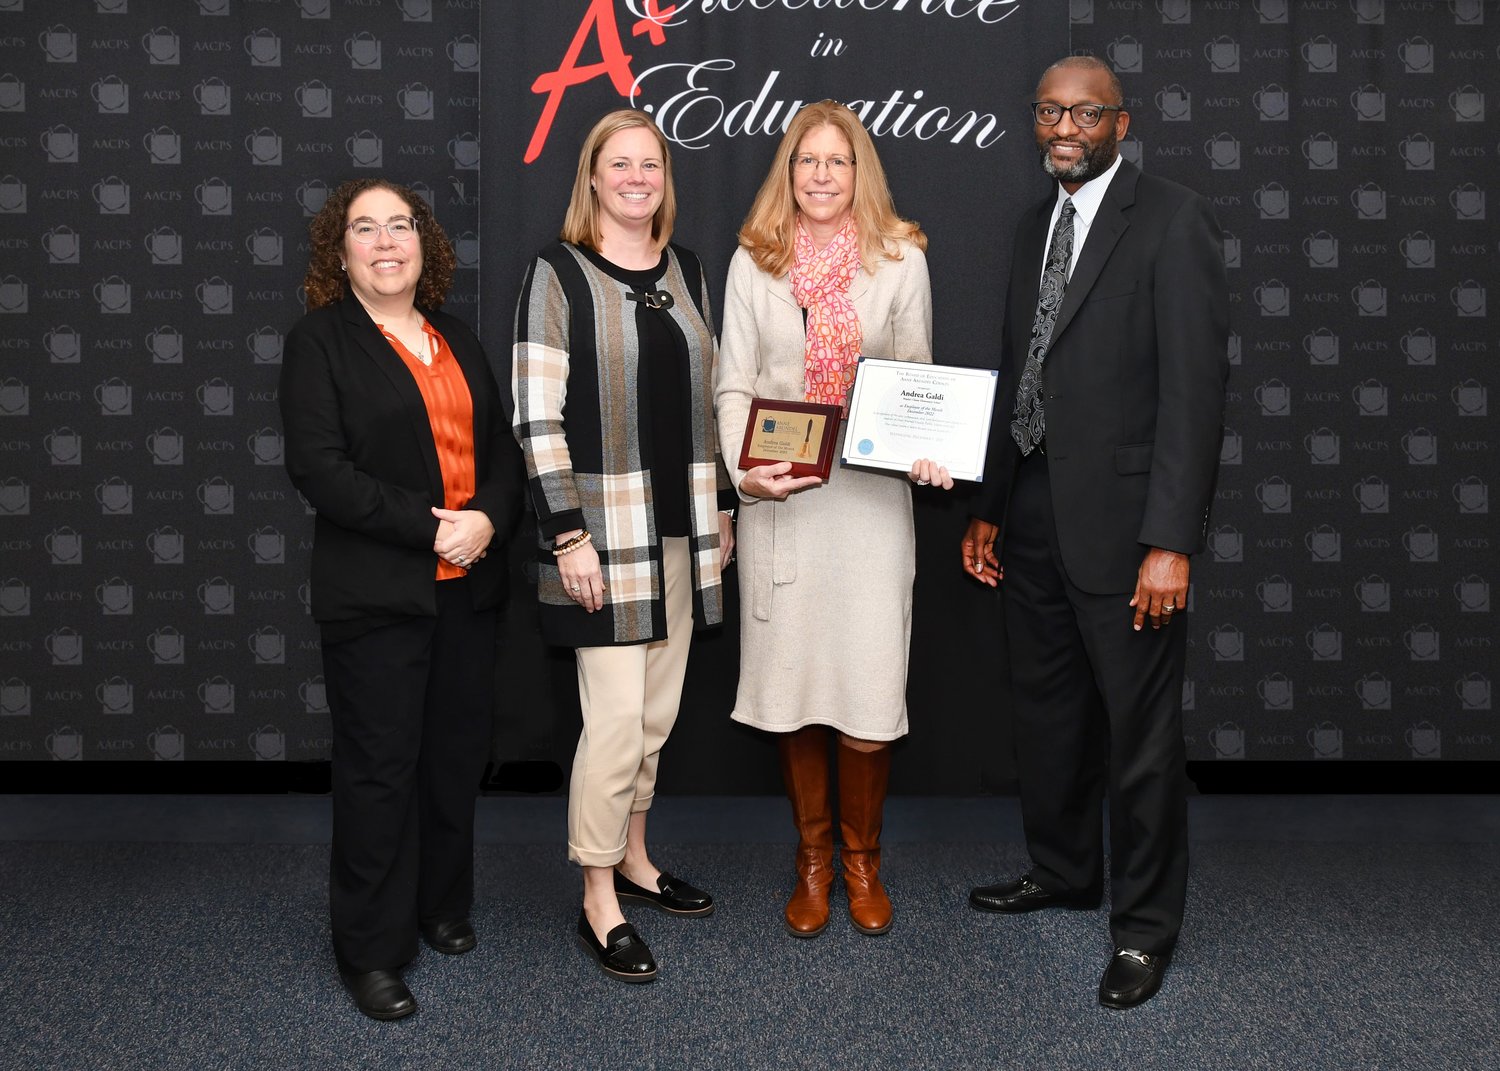 shipley-s-teacher-assistant-recognized-as-aacps-employee-of-the-month-pasadena